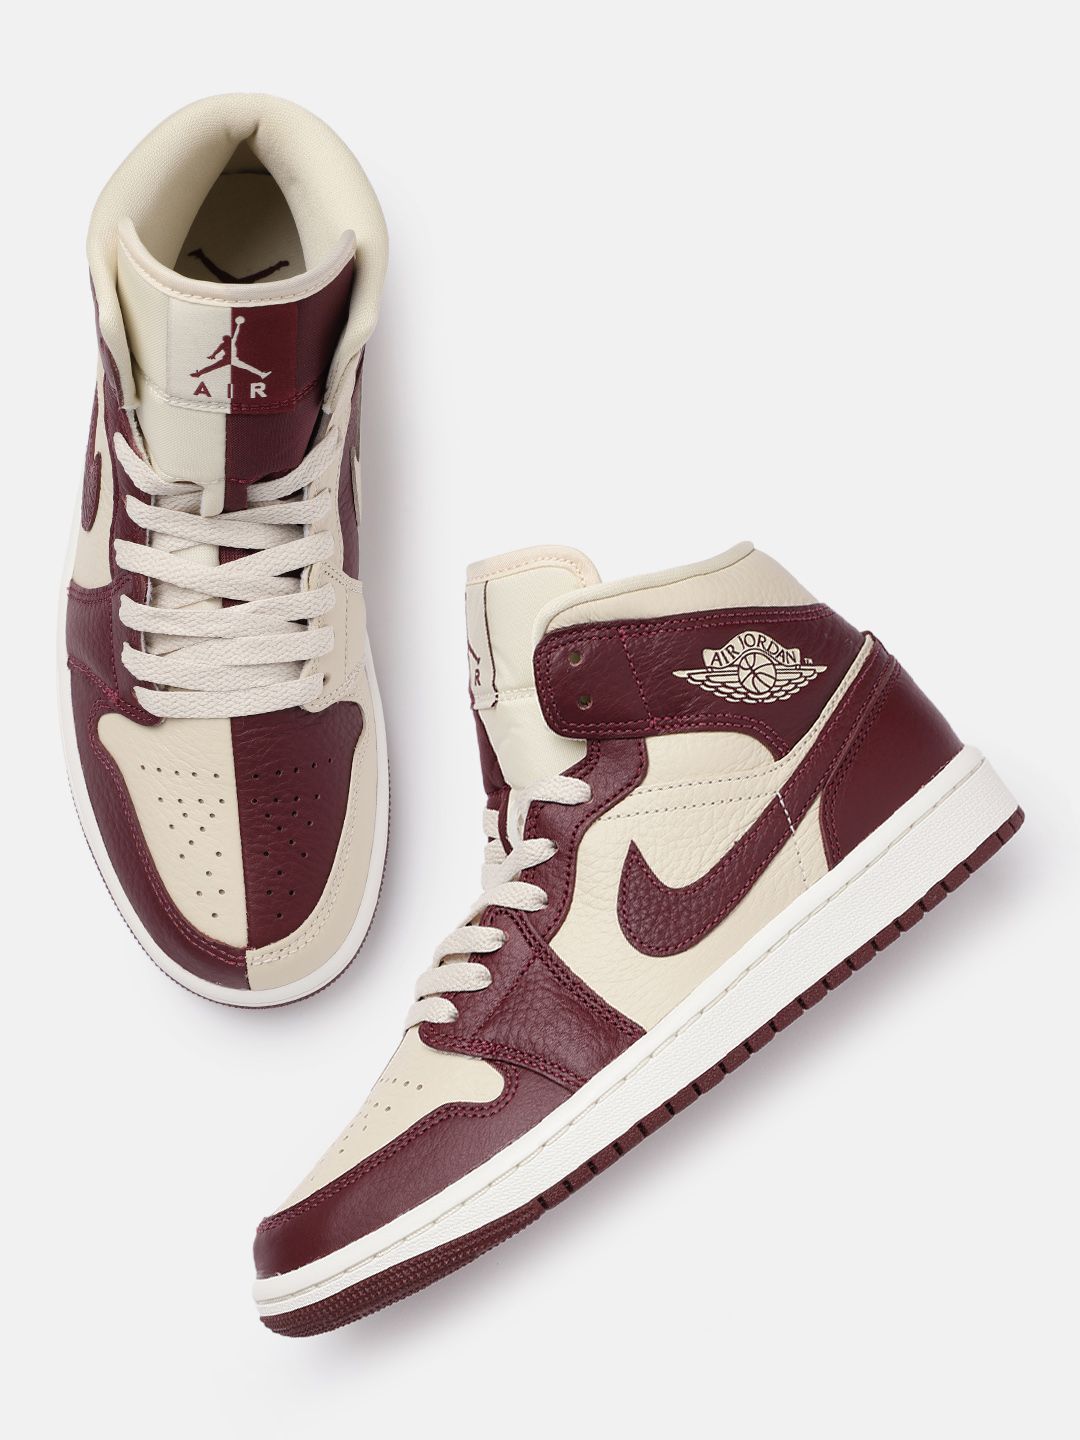 Nike Women Off White & Burgundy Air Jordan 1 Leather Basketball Shoes Price in India